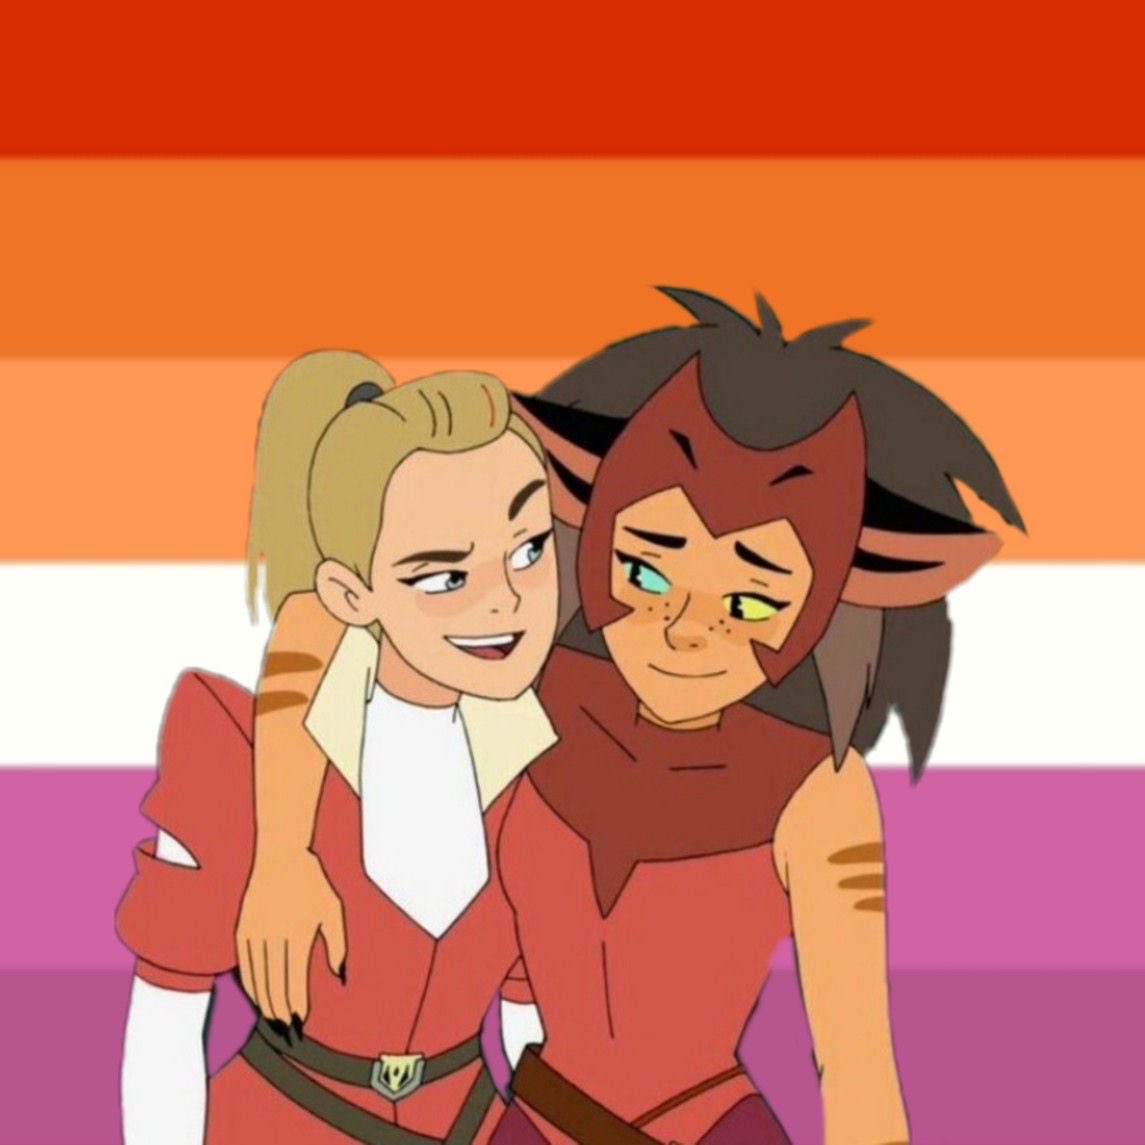 space lesbiansss!! i love catradora so frickin much i was literally so excited to draw them! and i’m really happy with how it turned out :D
#shera #adora #catra #catradora #catradorafanart #lesbianpride